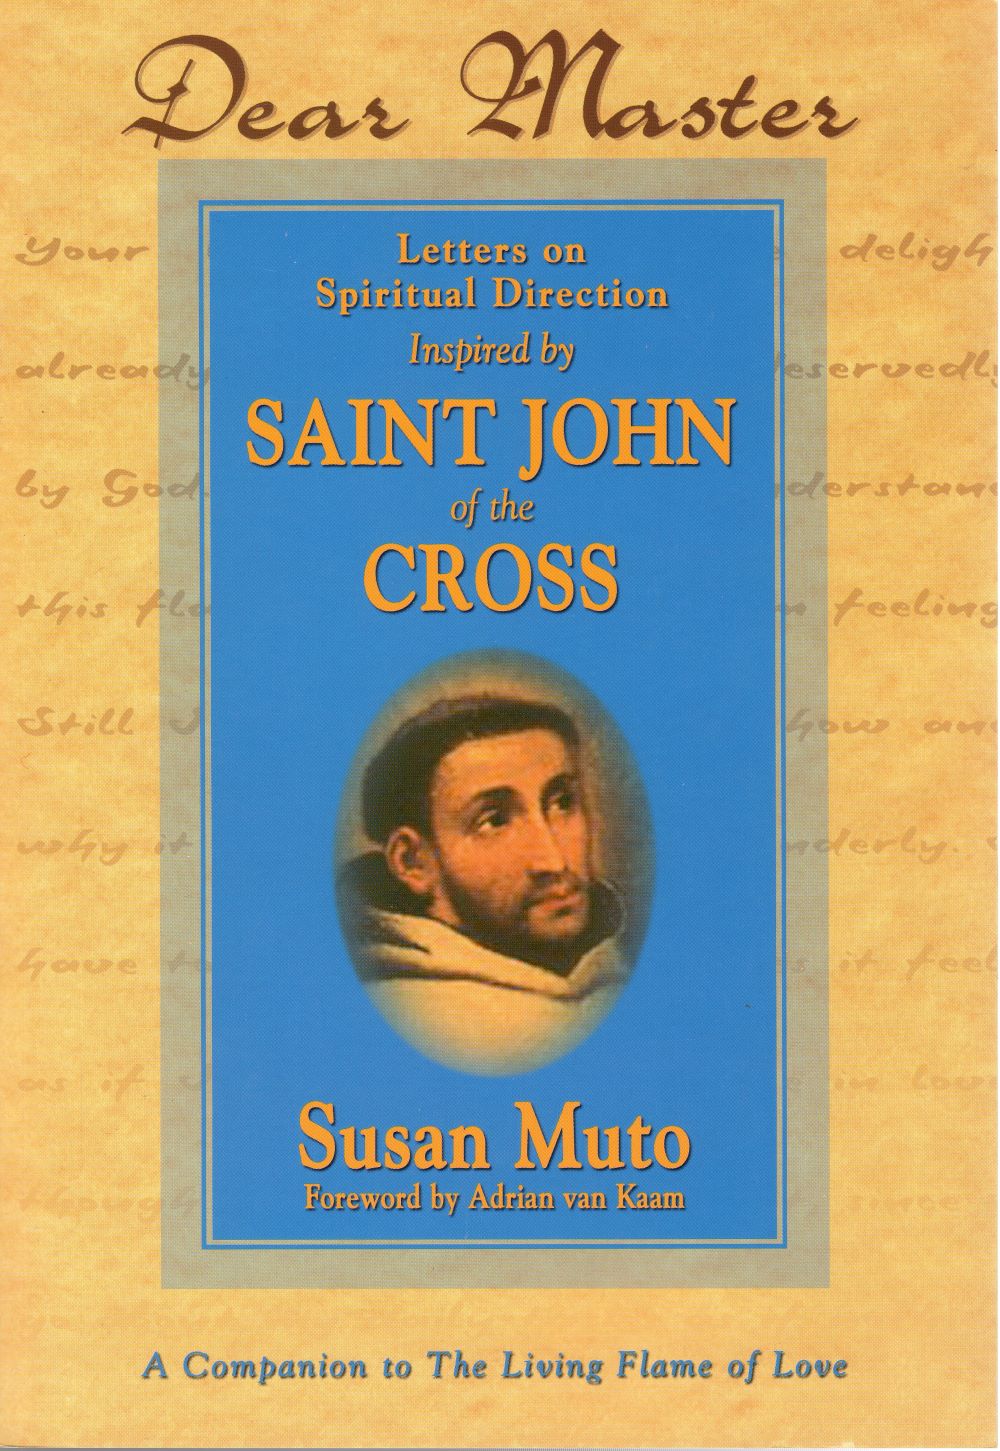 DEAR MASTER: Letters on Spiritual Direction inspired by Saint John of the Cross (2004)